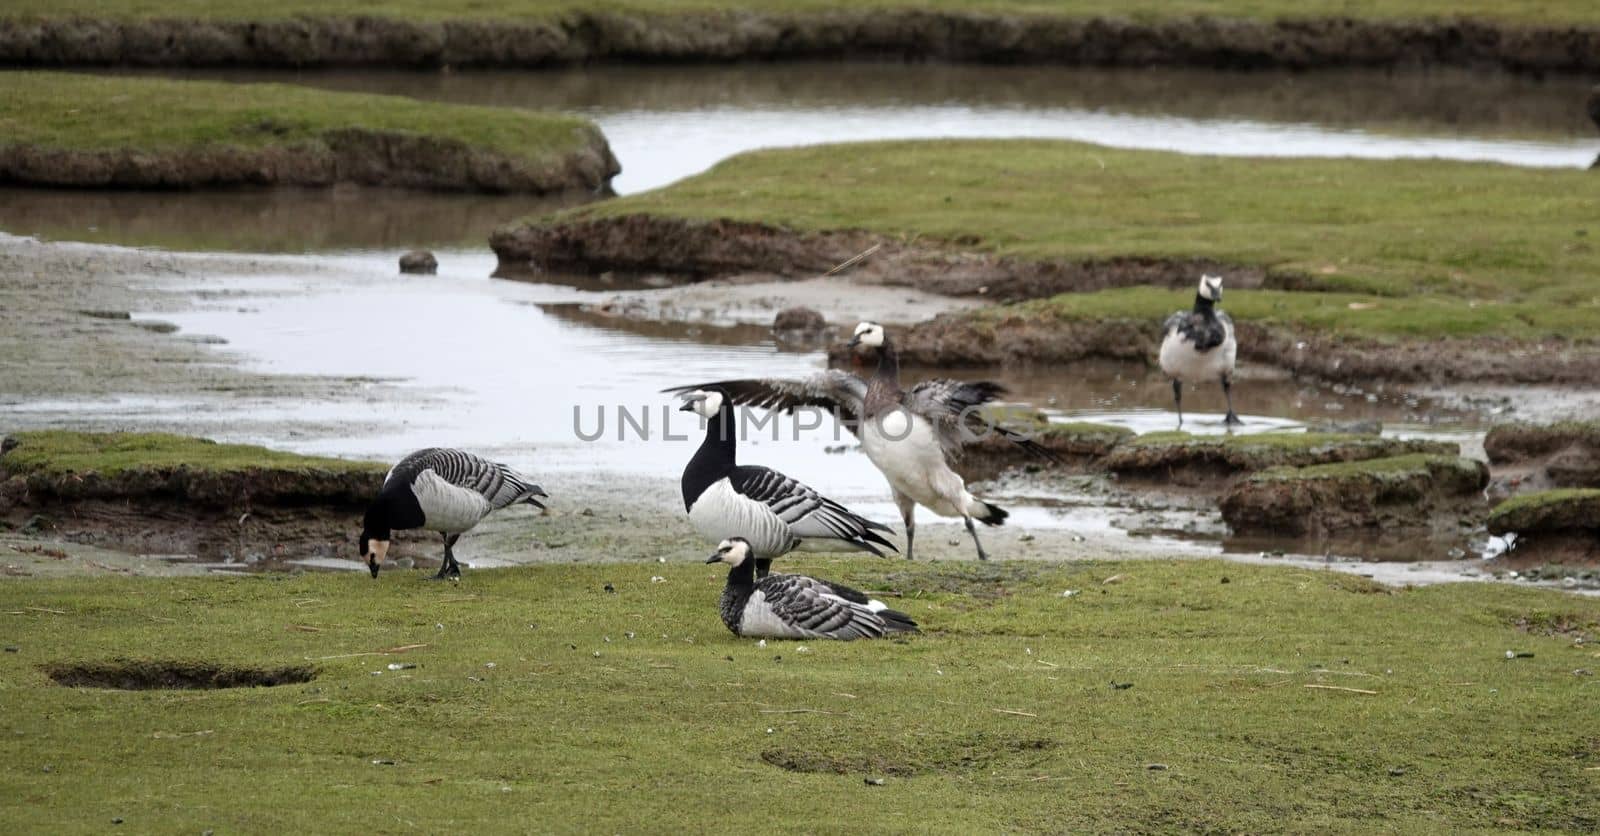 Just outside the dyke enjoys a group of barnacle geese the brackish water of the Dollard in East Frisia (Germany)